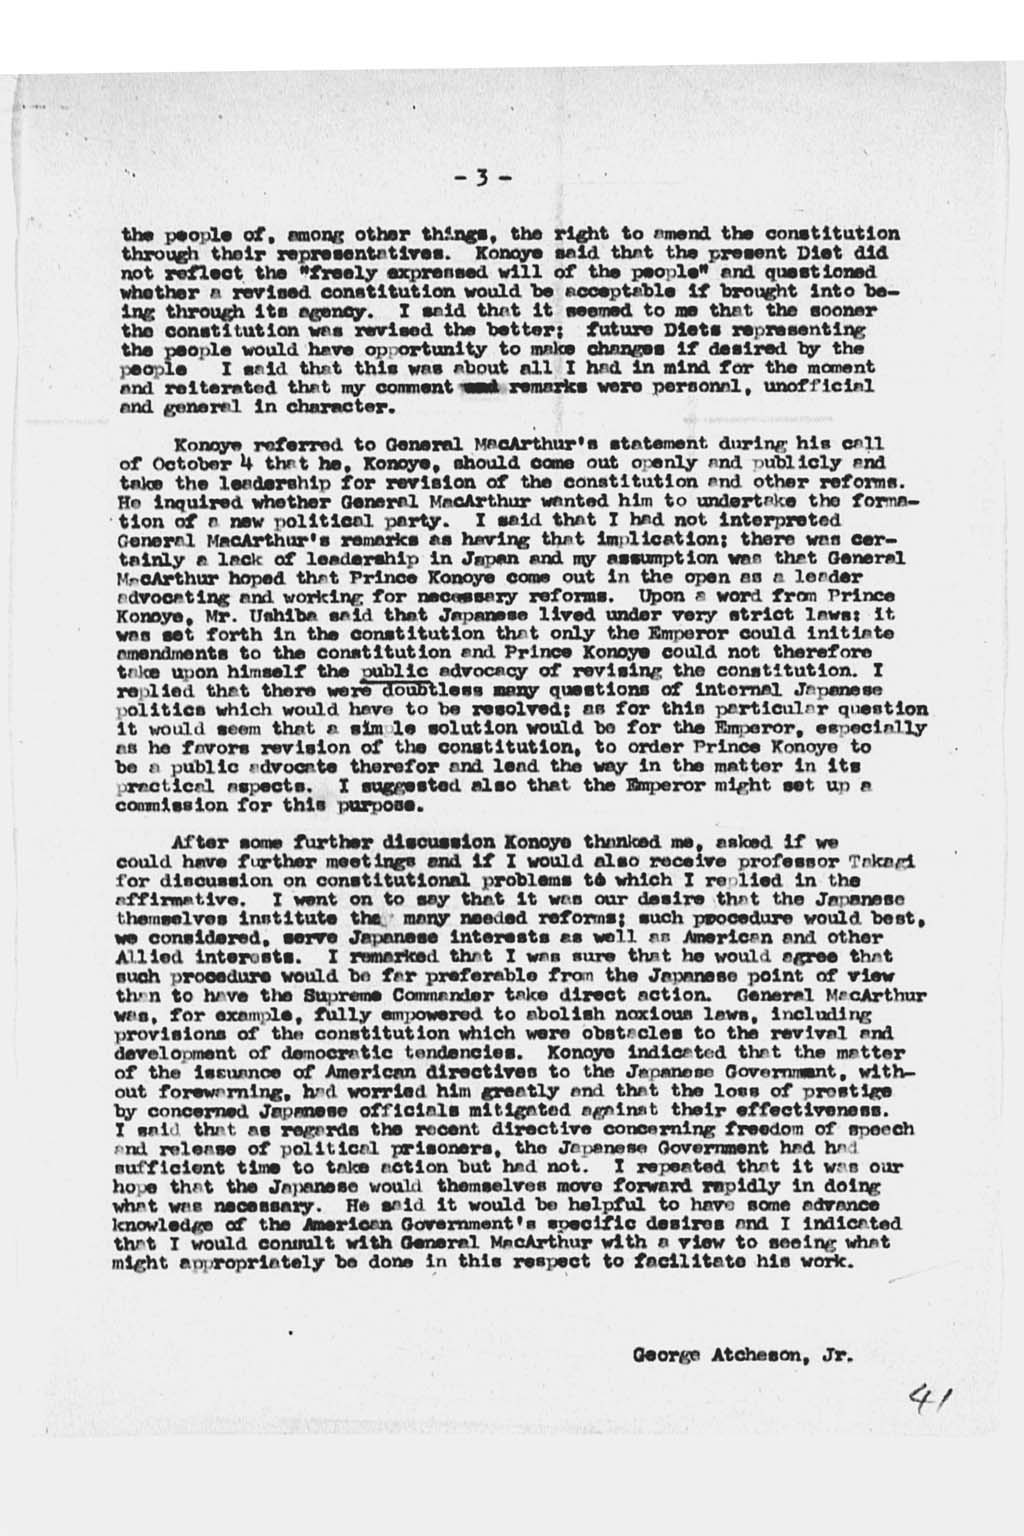 [George Atcheson, Jr. to the Secretary of State, Subject: Revision of Japanese Constitution; Discussion with Prince Konoye](Larger image)